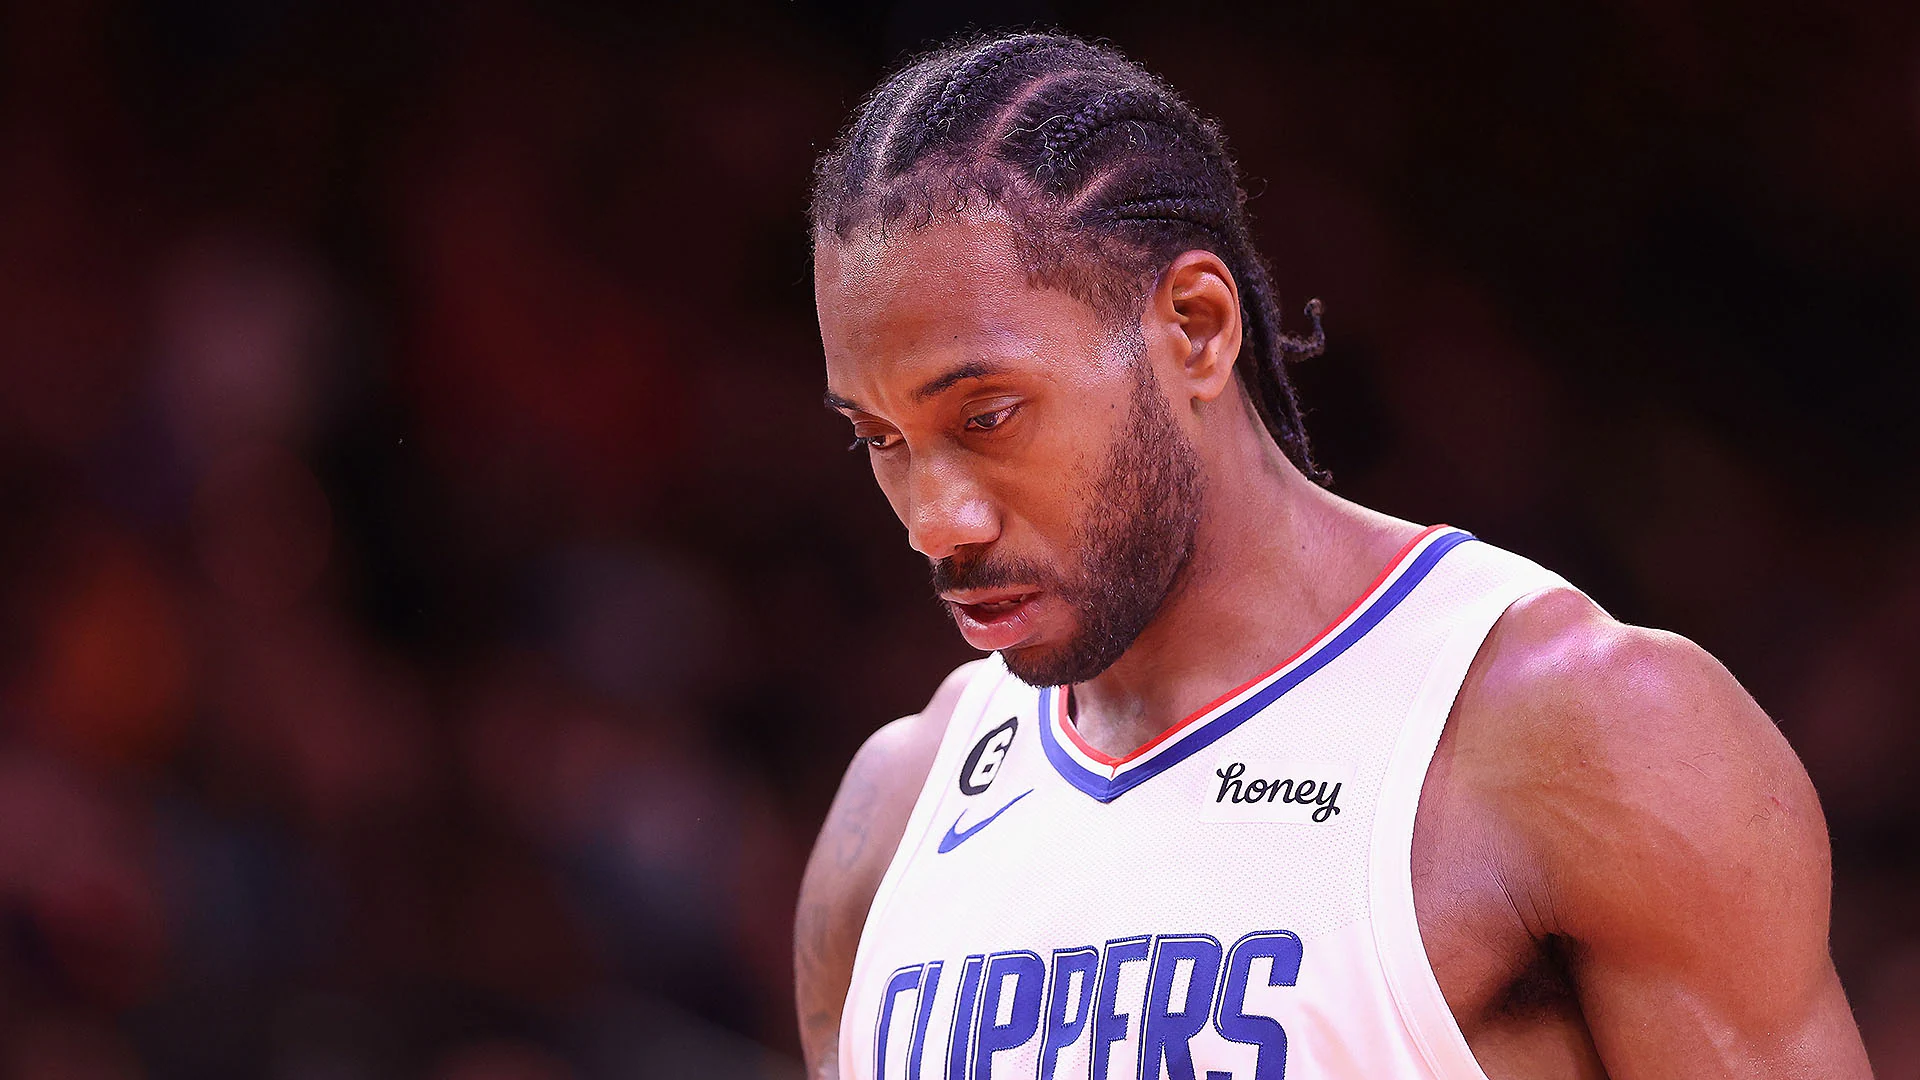 NBA Kawhi Leonard LA Clippers Trade Deal Likely Unless Player Reduces His Fees